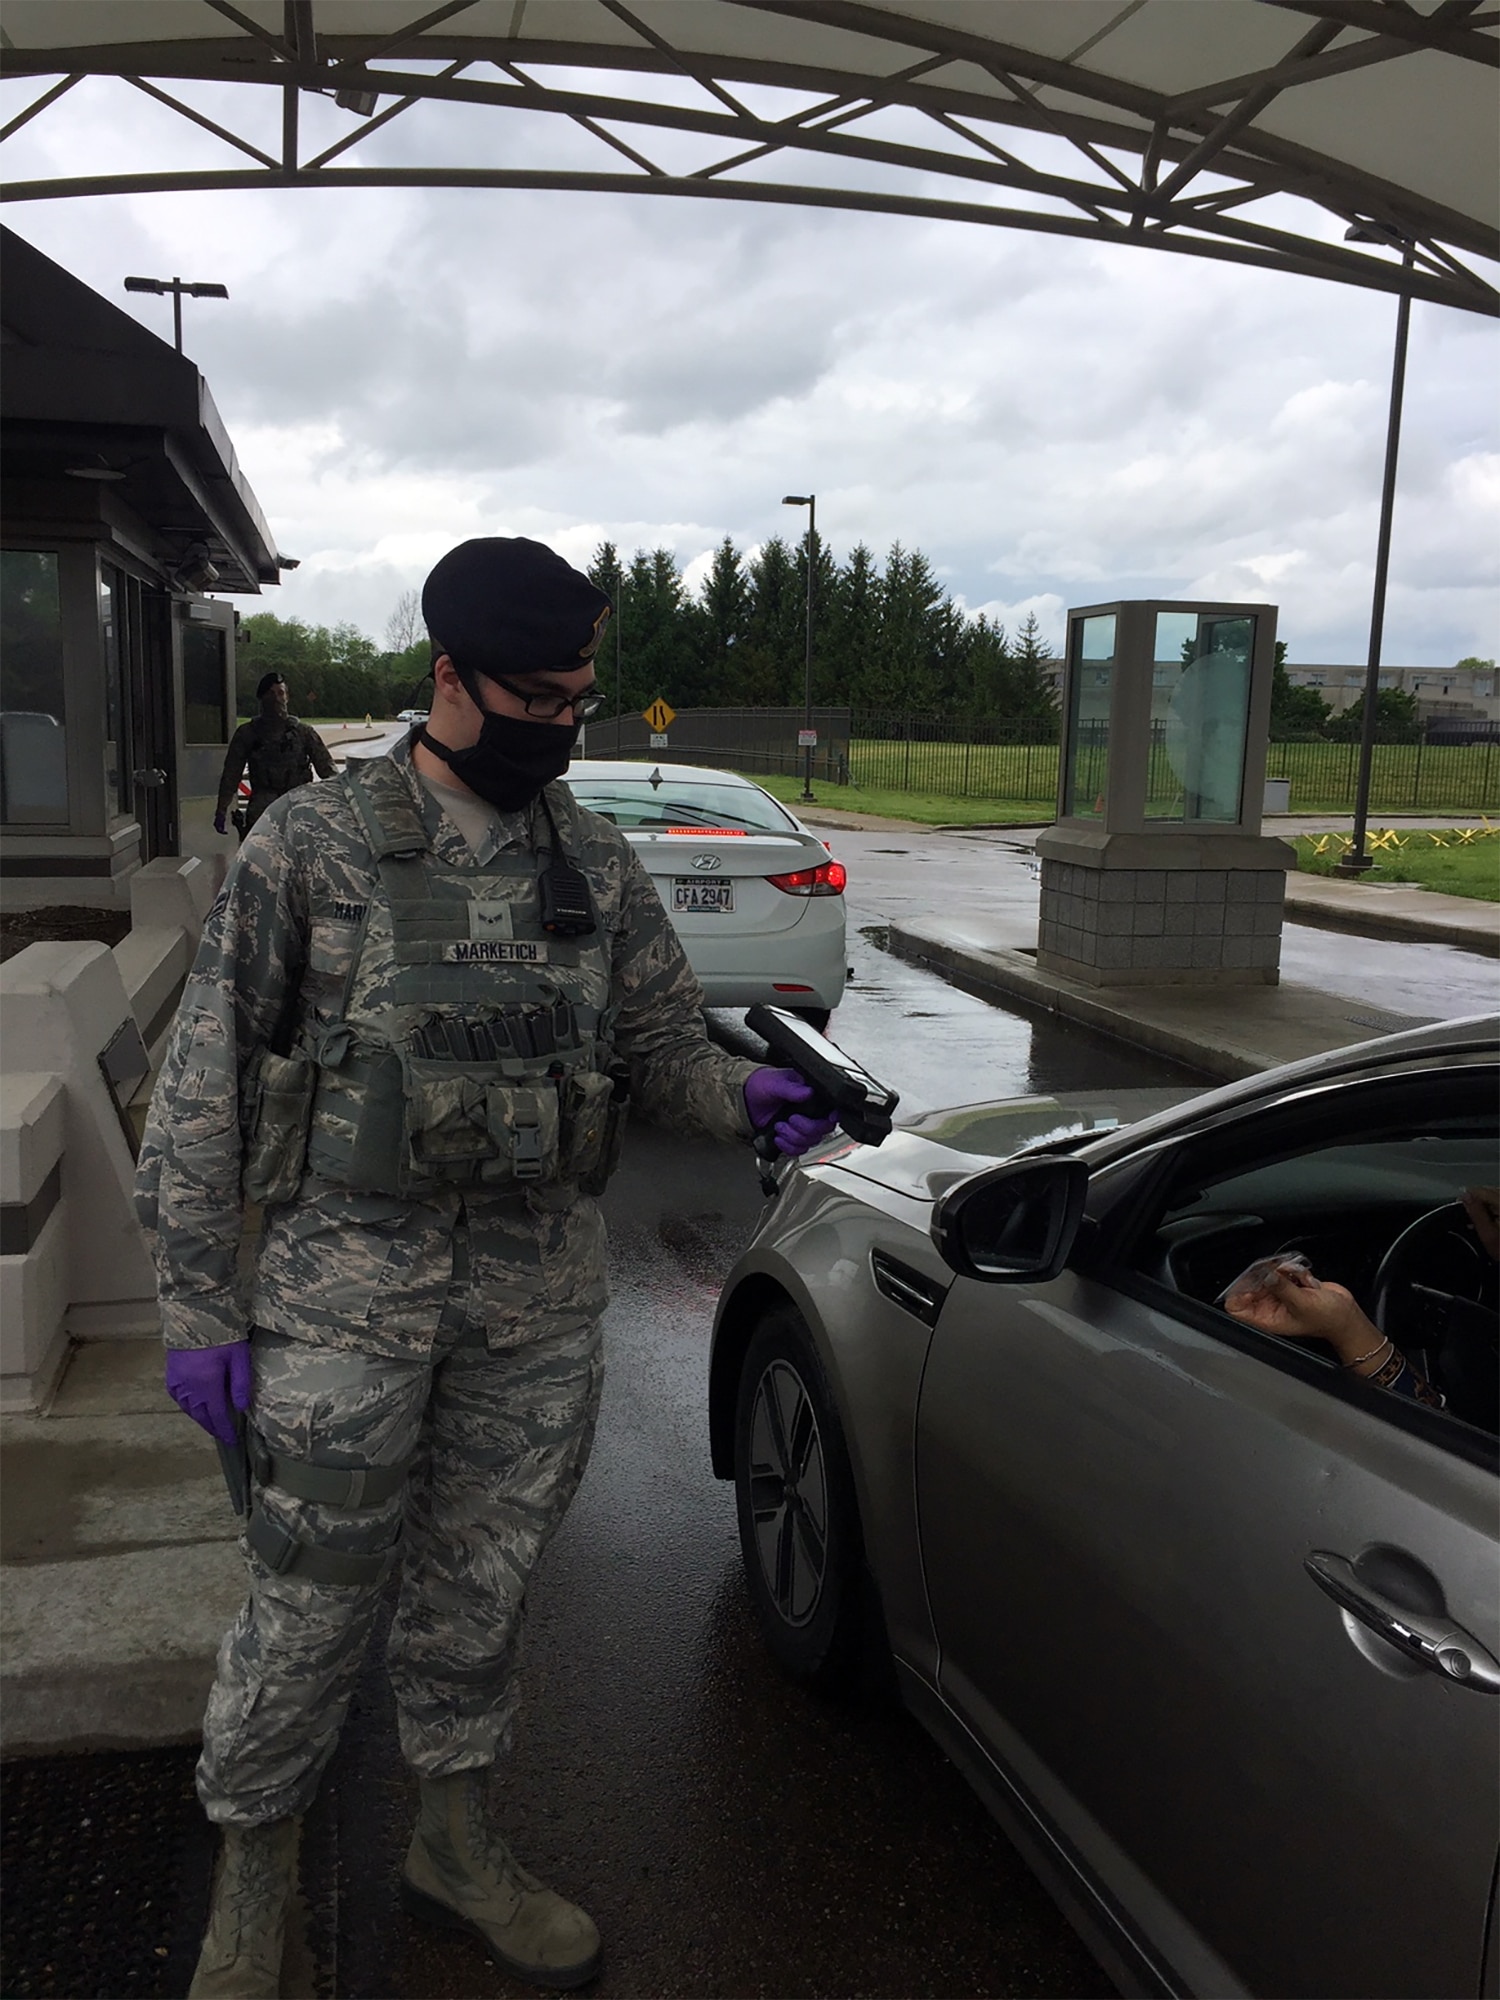 Senior Airman Aaron Marketich, 88th Security Forces Squadron, demonstrates the mask and gloves he and fellow defenders are utilizing during the COVID-19 situation on May 18 at Wright-Patterson Air Force Base’s Gate 12A.